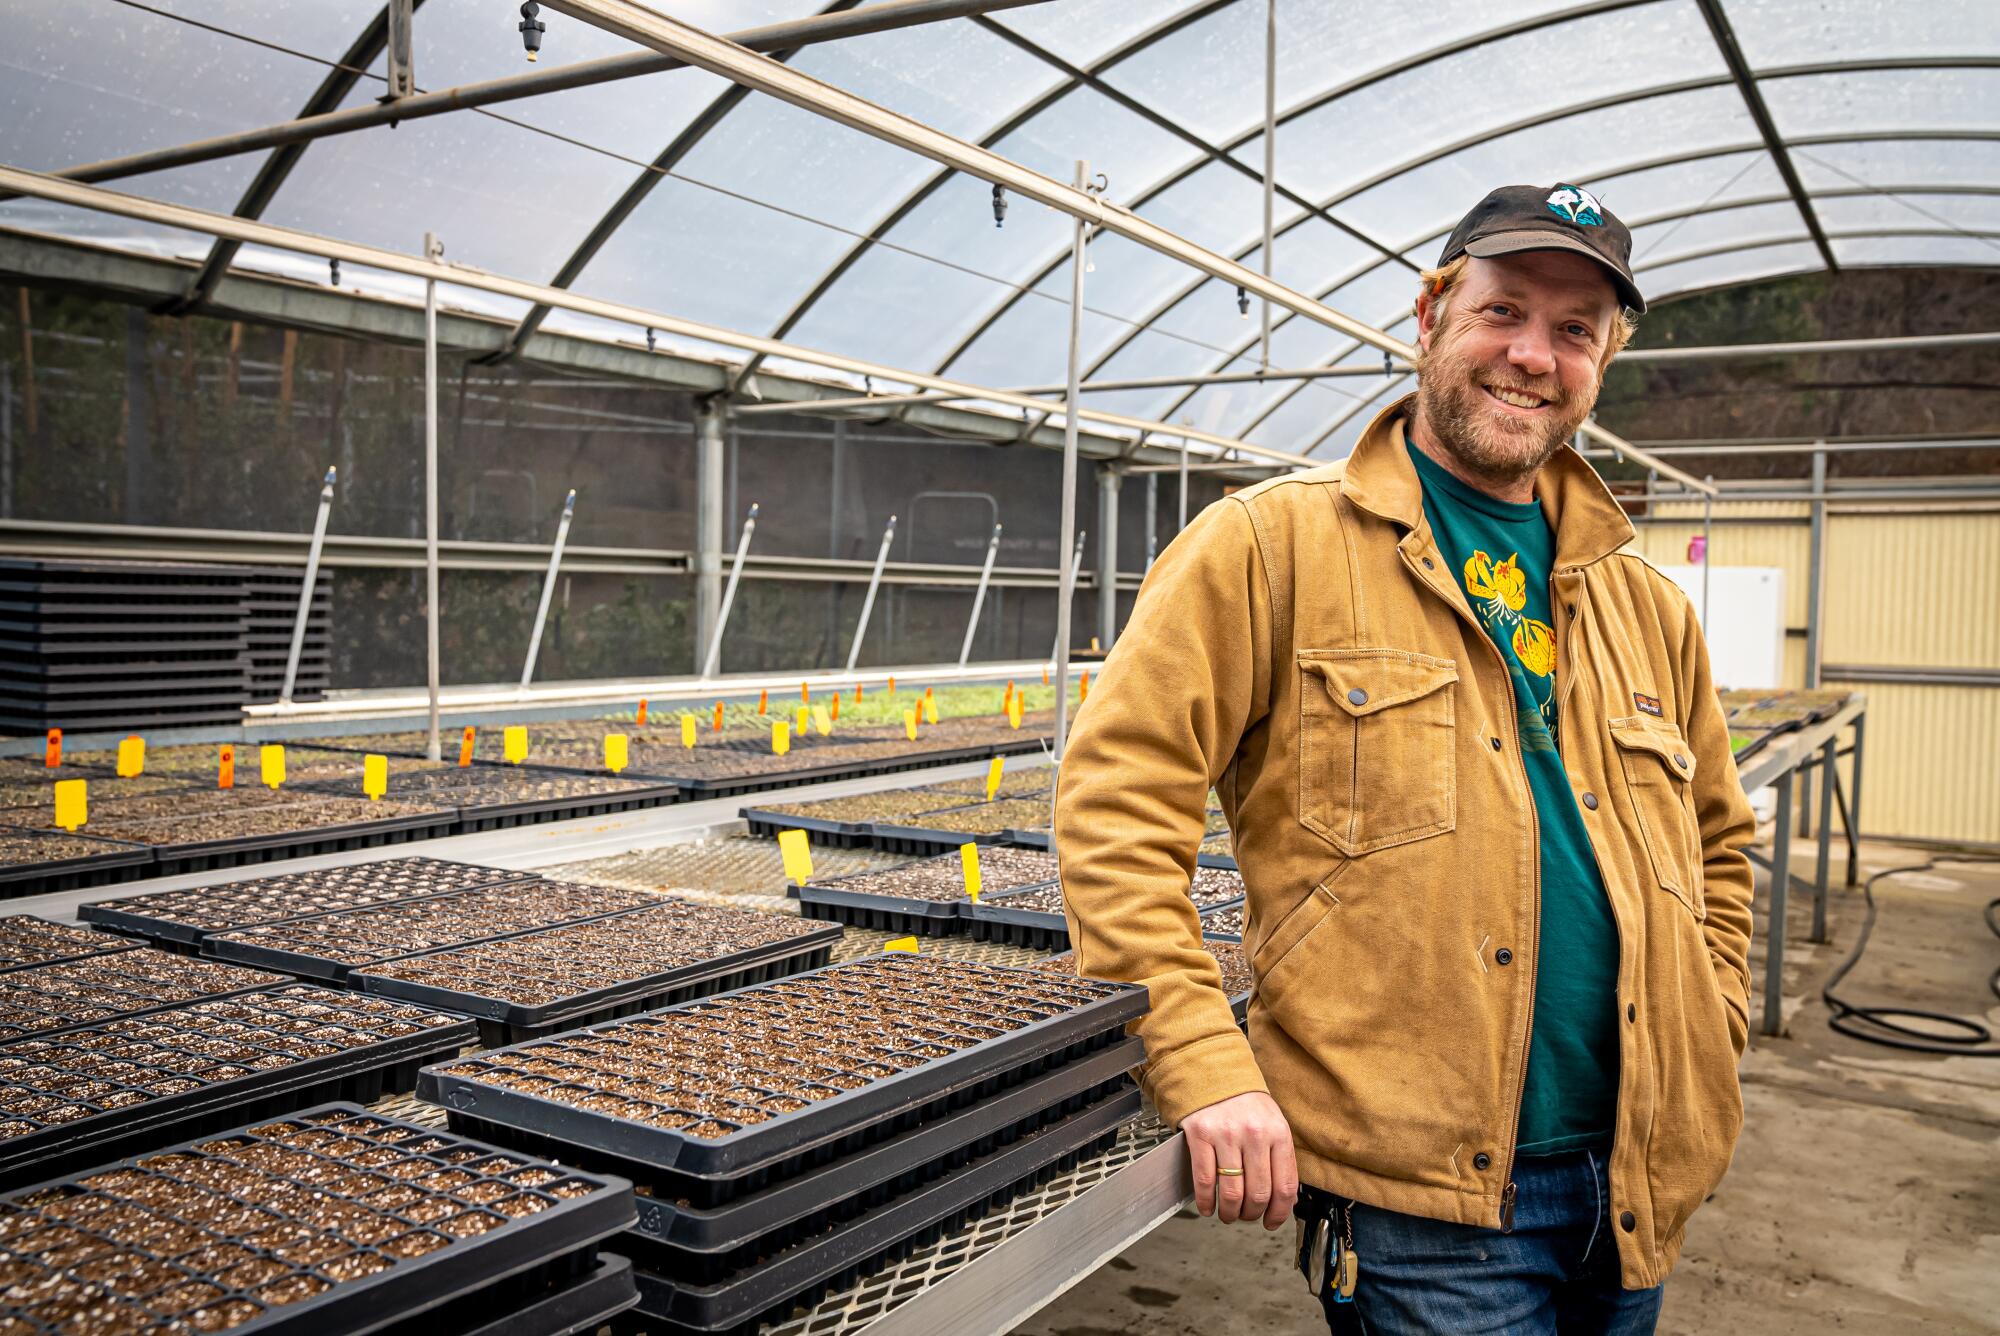 A smiling man stands next to trays of seedlings in a greenhouse.